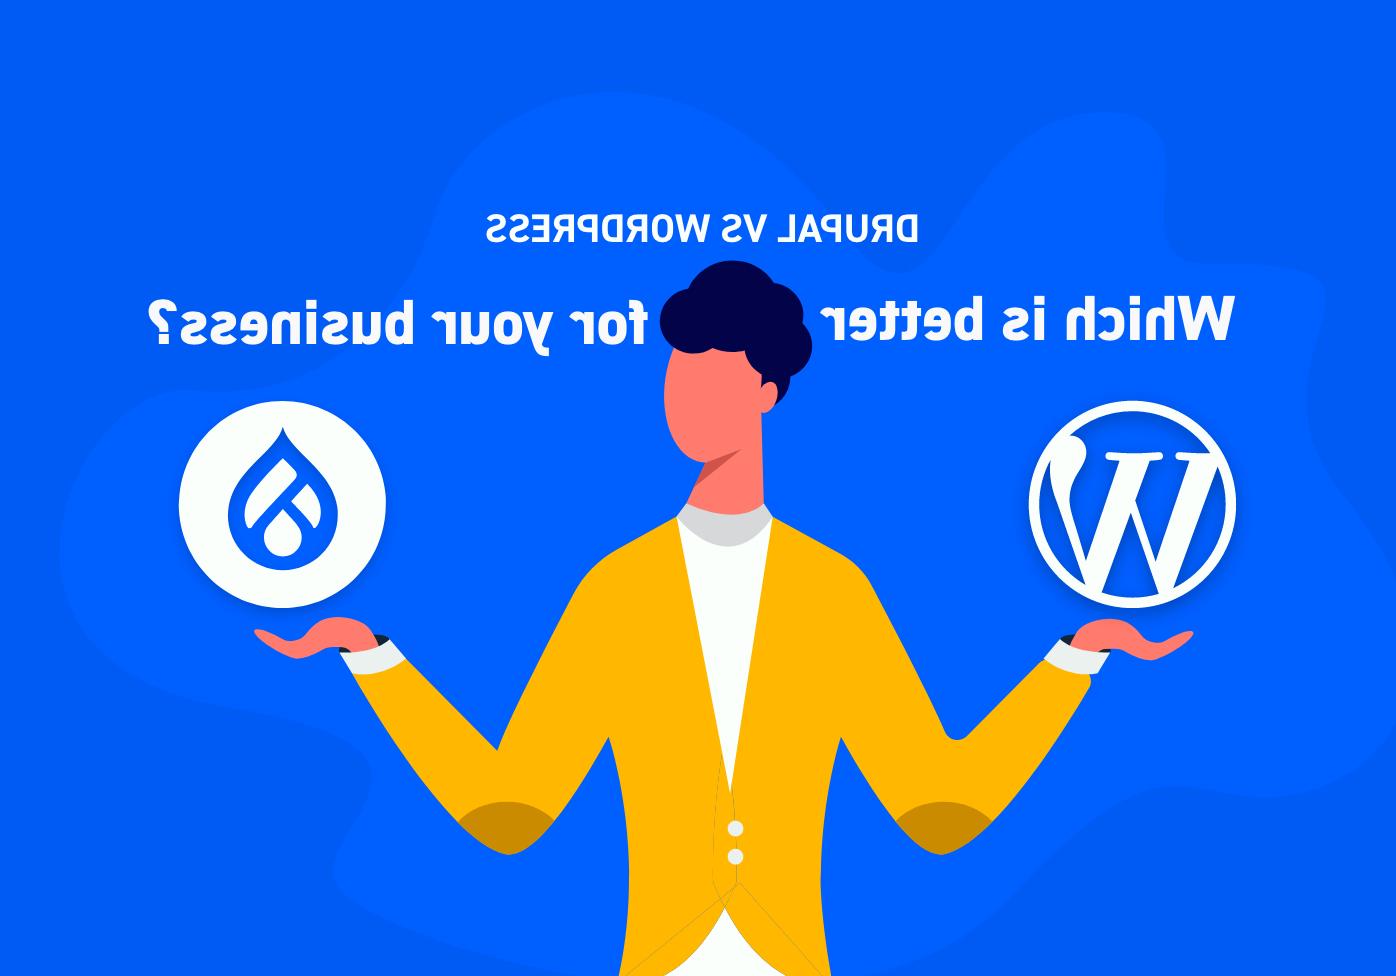 Drupal vs. WordPress: Why Most Are Making the Switch